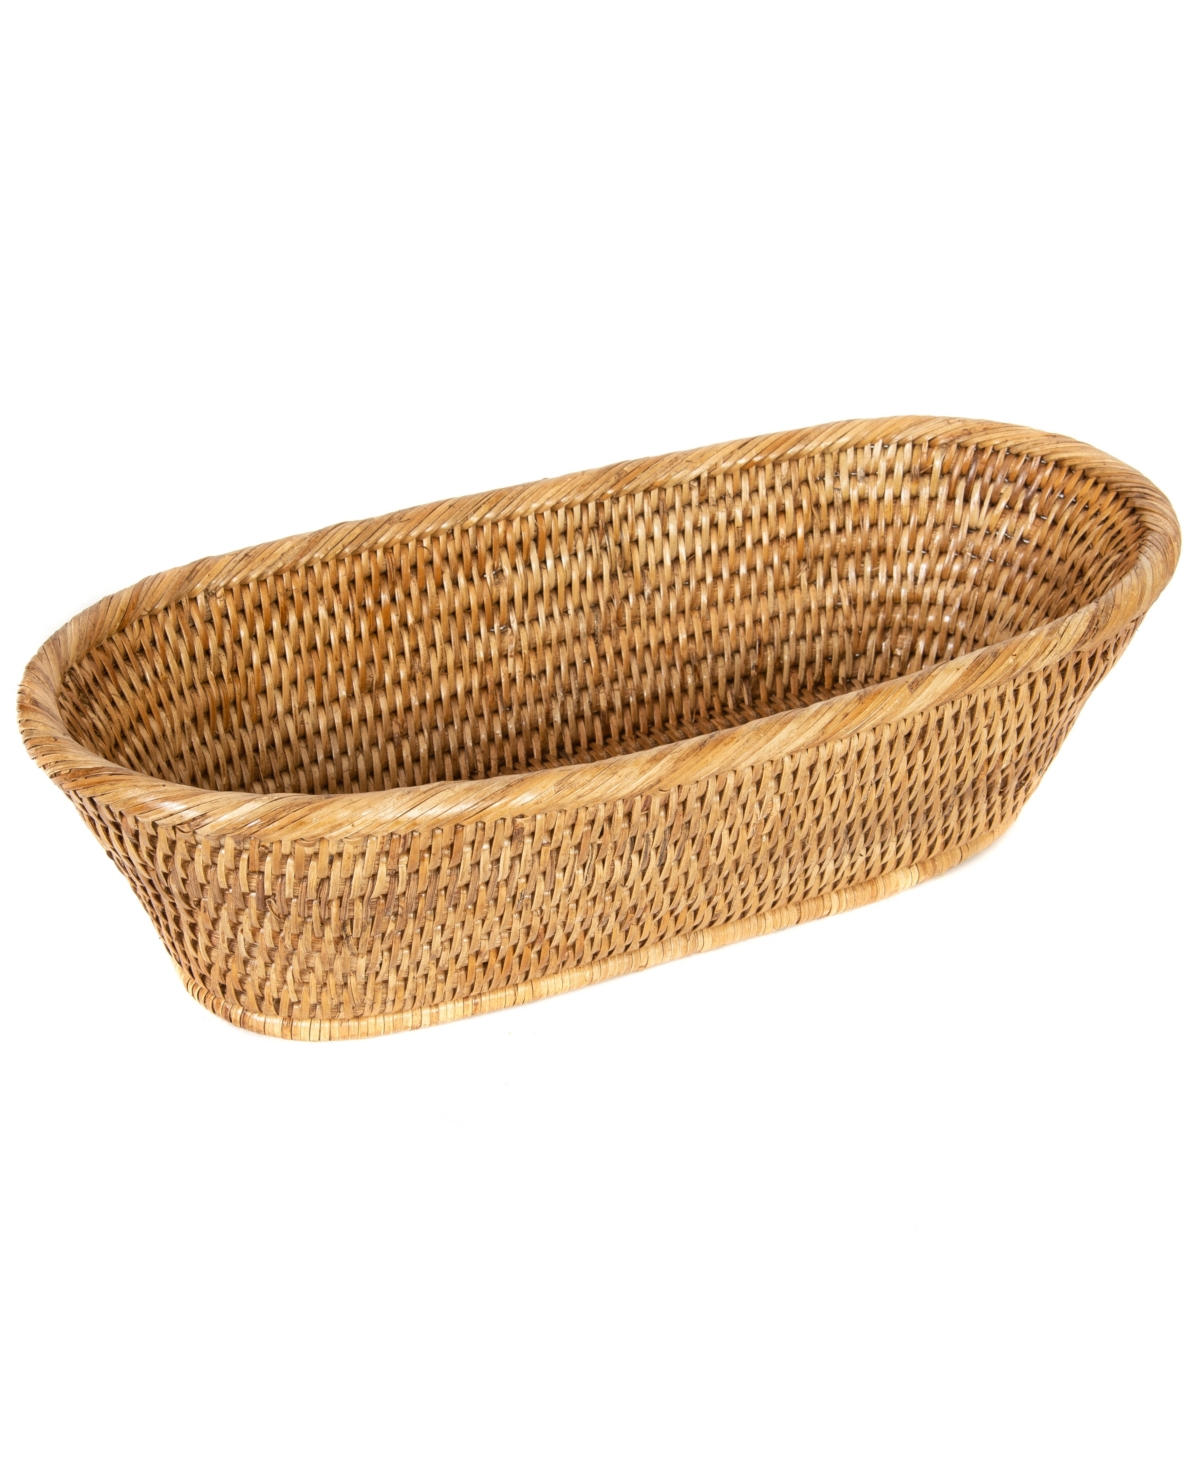 Artifacts Trading Company Artifacts Rattan Oval Bread Basket In Honey Brown